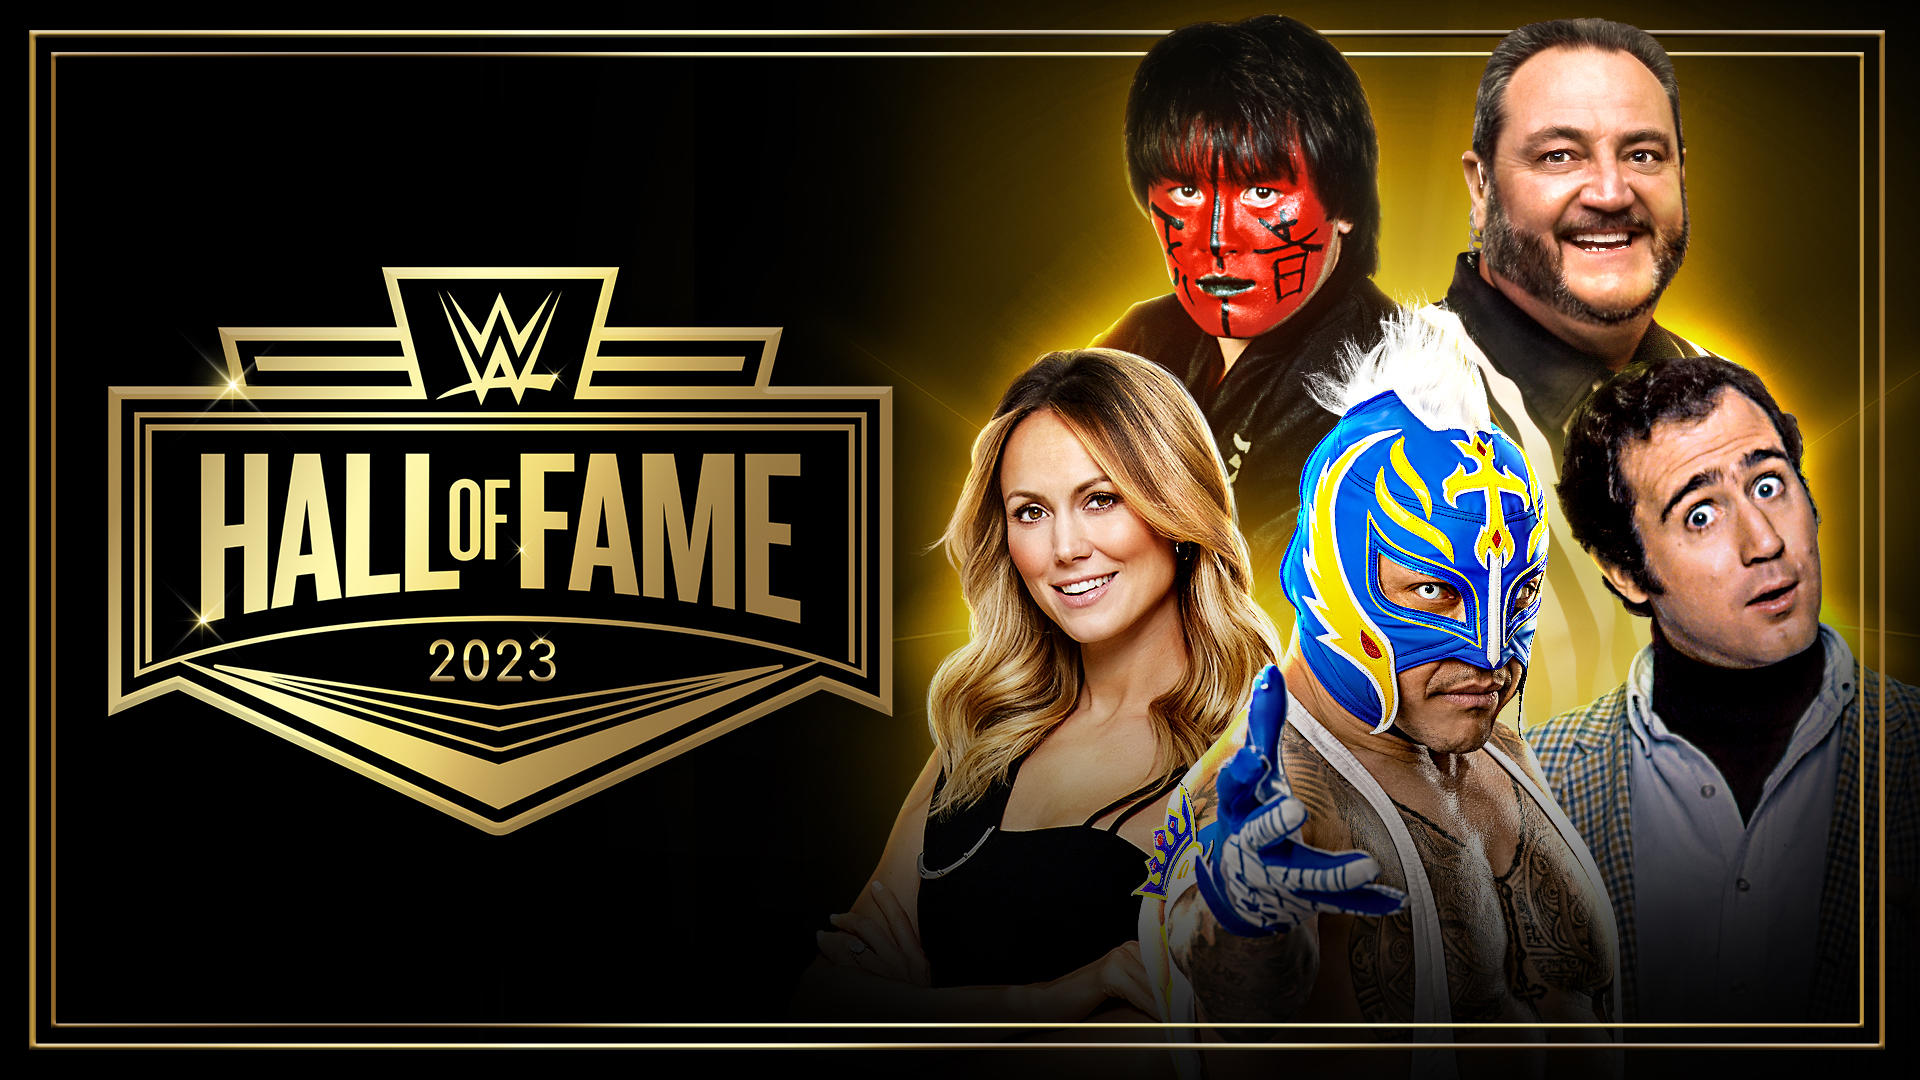 WWE Hall of Fame 2023 Live Coverage Rey Mysterio, The Great Muta, Andy